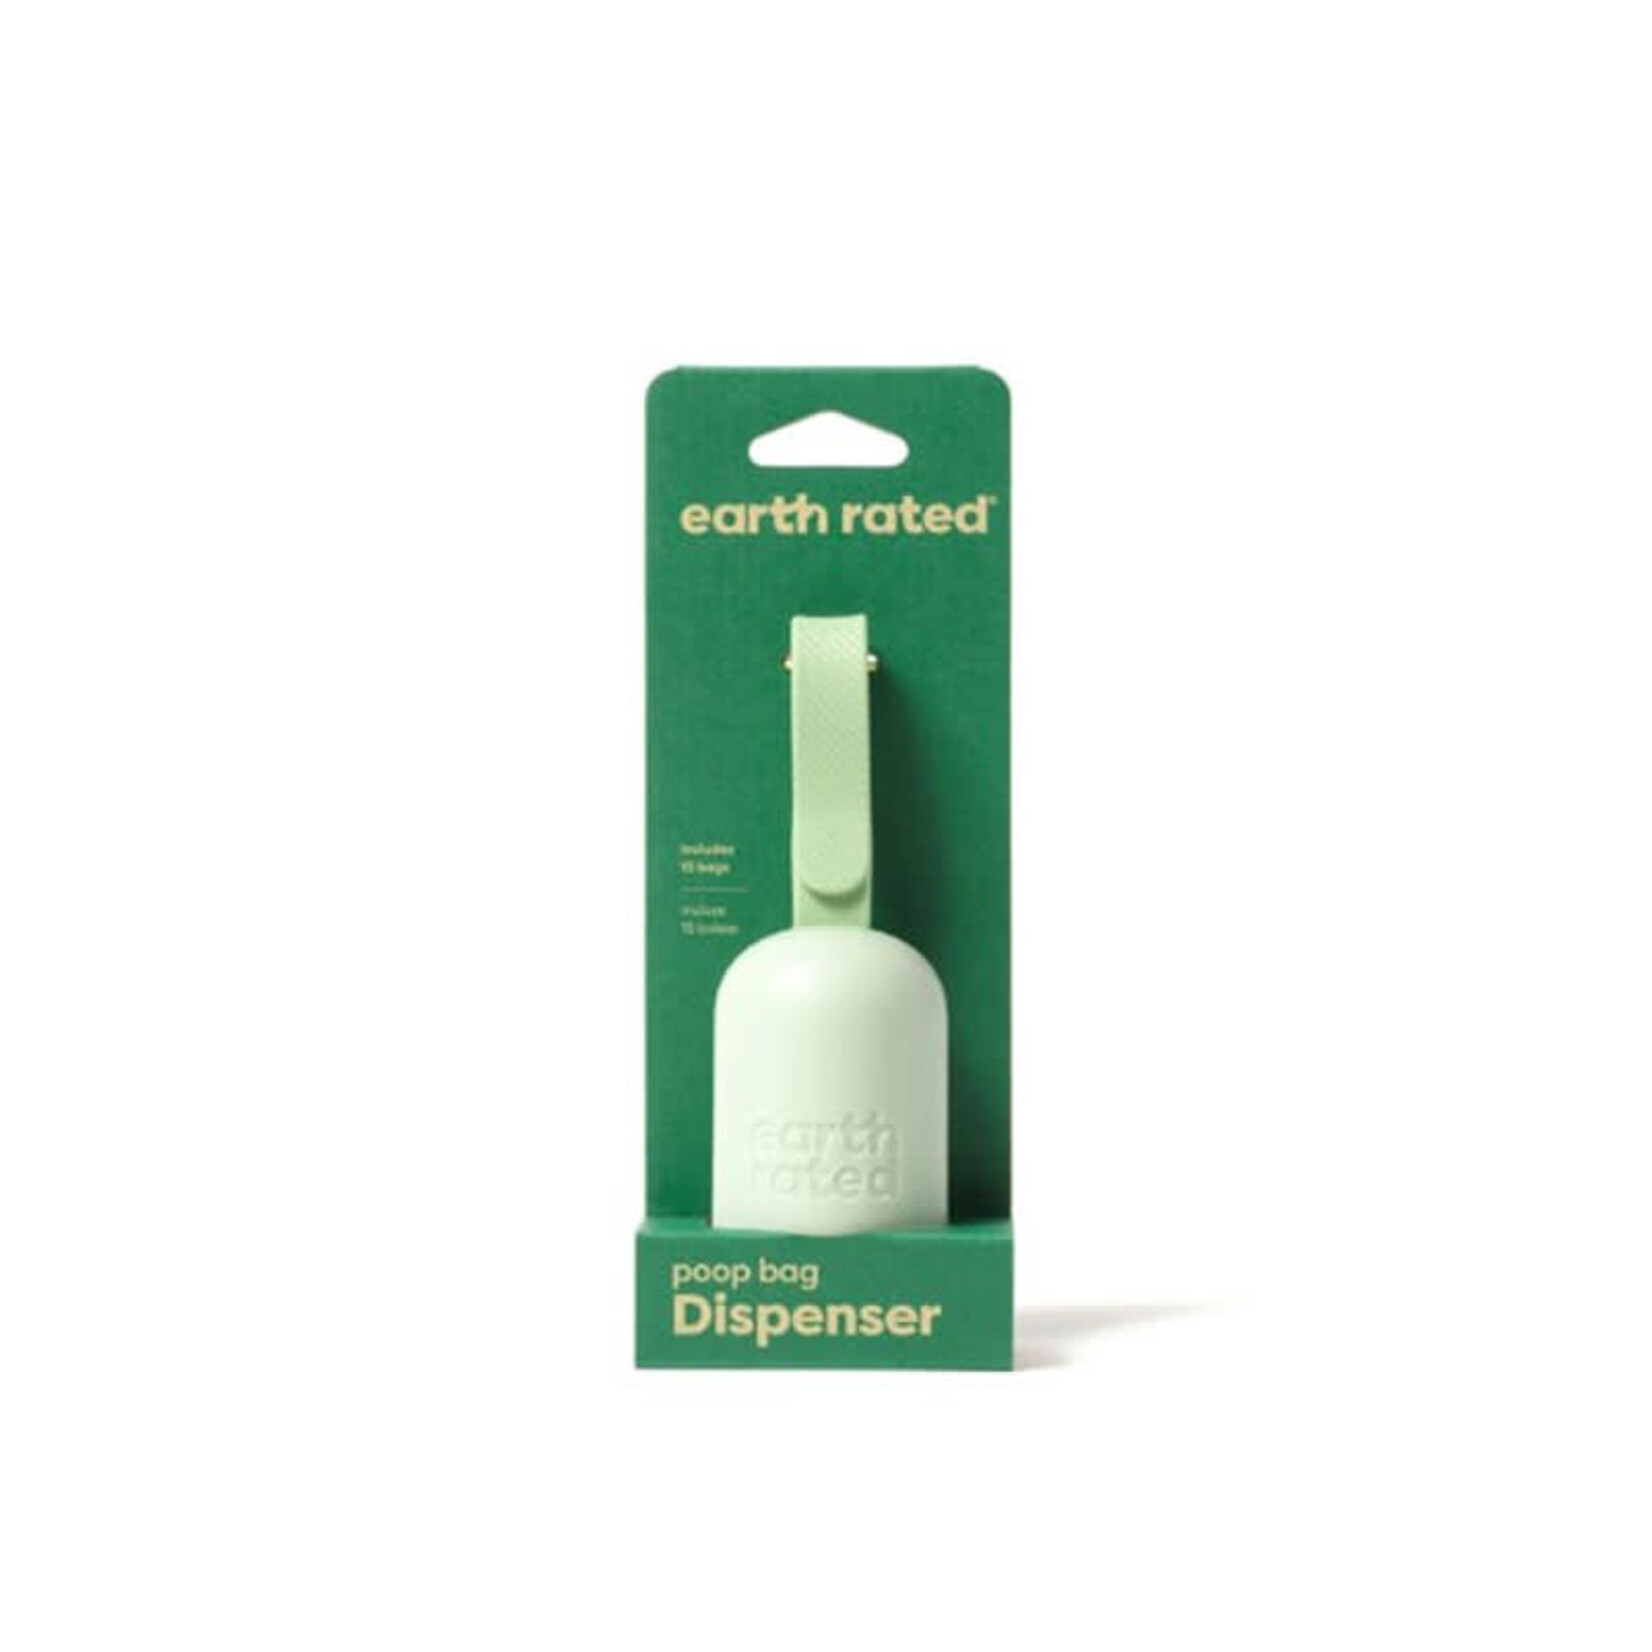 Earth Rated PoopBags Earth Rated - Unscented Poop Bag Dispenser